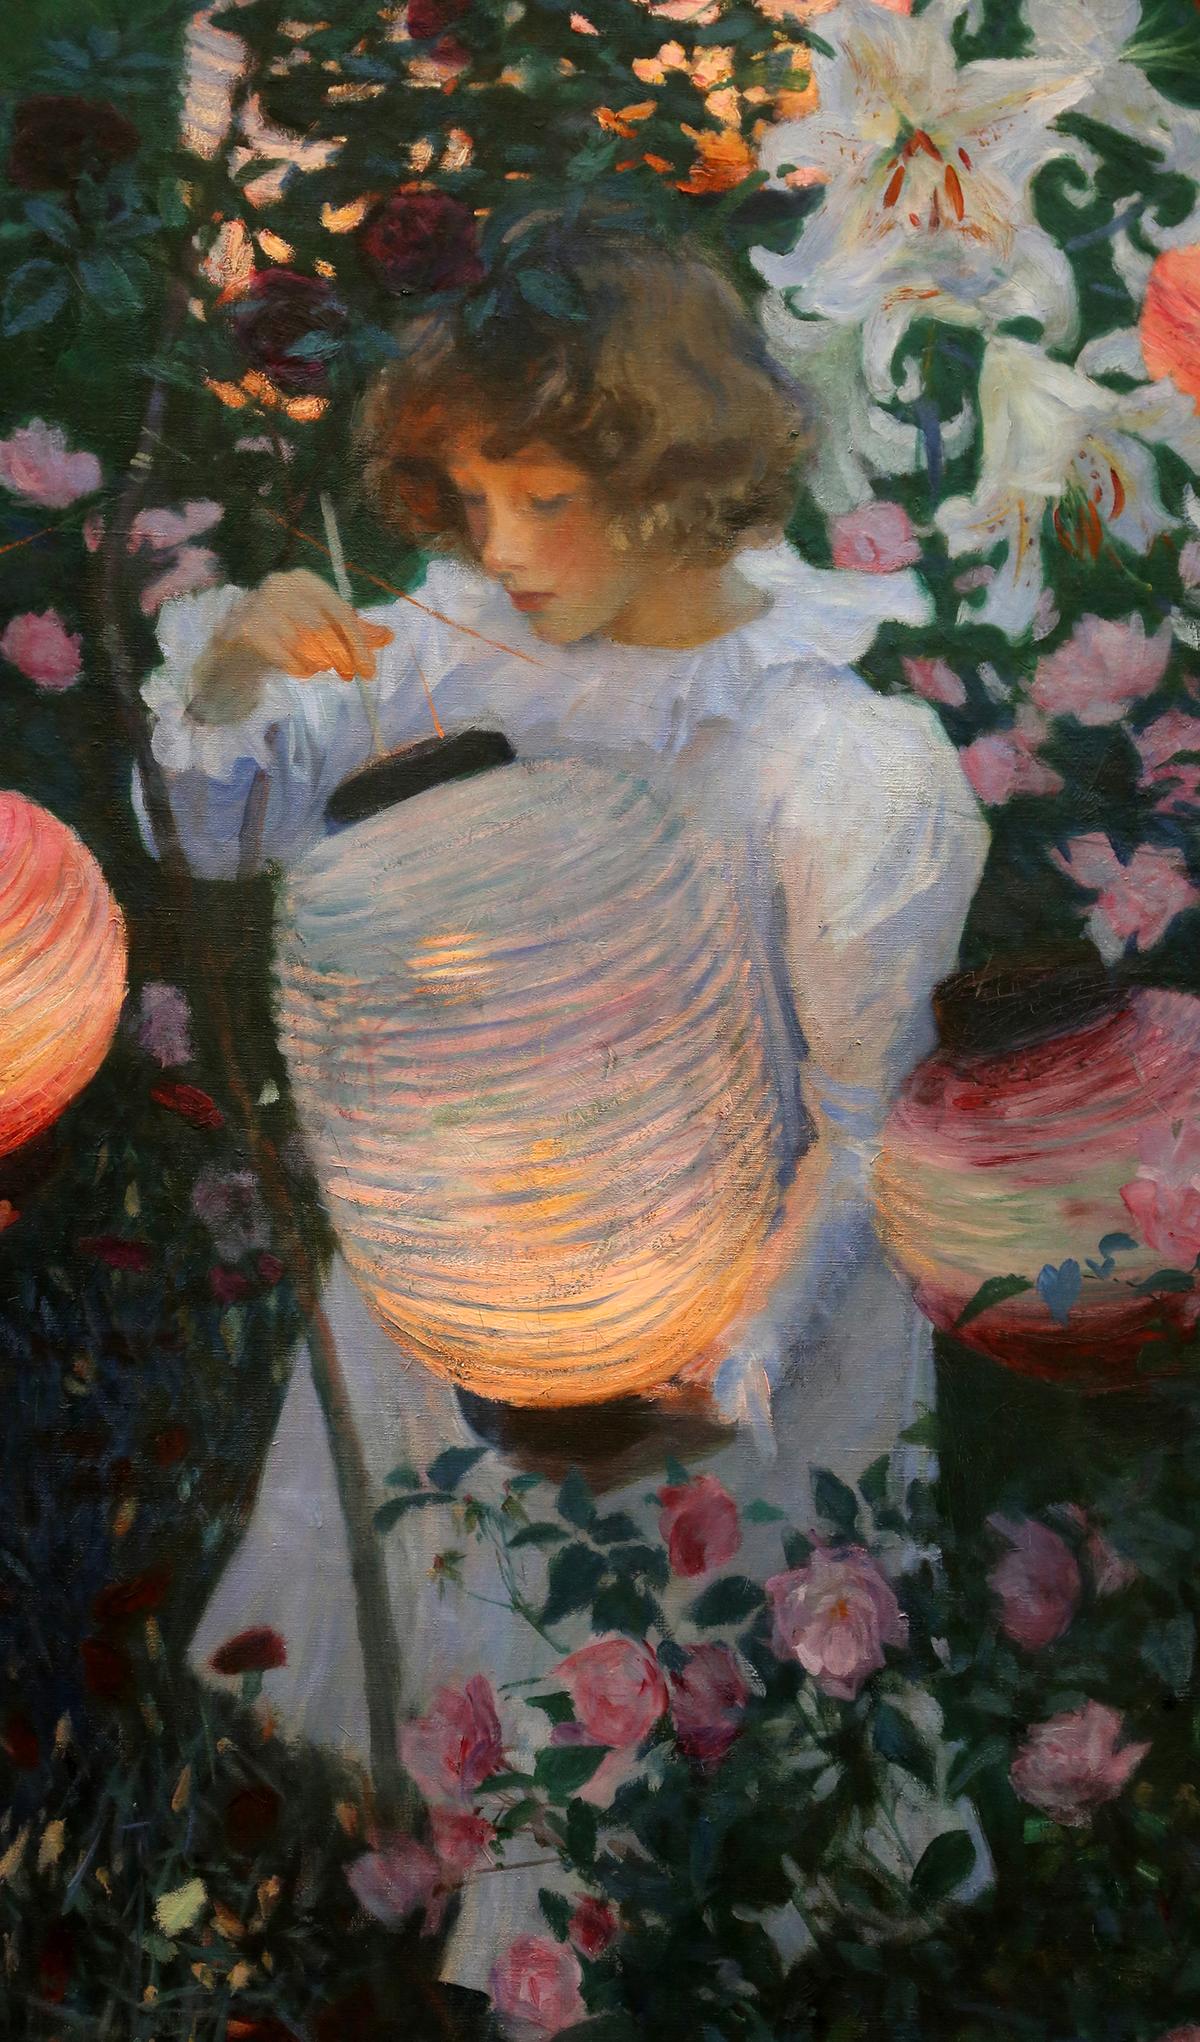 Detail of "Carnation, Lily, Lily, Rose," between 1885 and 1886, by John Singer Sargent. (<a title="User:Sailko" href="https://commons.wikimedia.org/wiki/User:Sailko">Sailko</a>/<a href="https://creativecommons.org/licenses/by/4.0/deed.en">CC BY 4.0 Deed</a>)